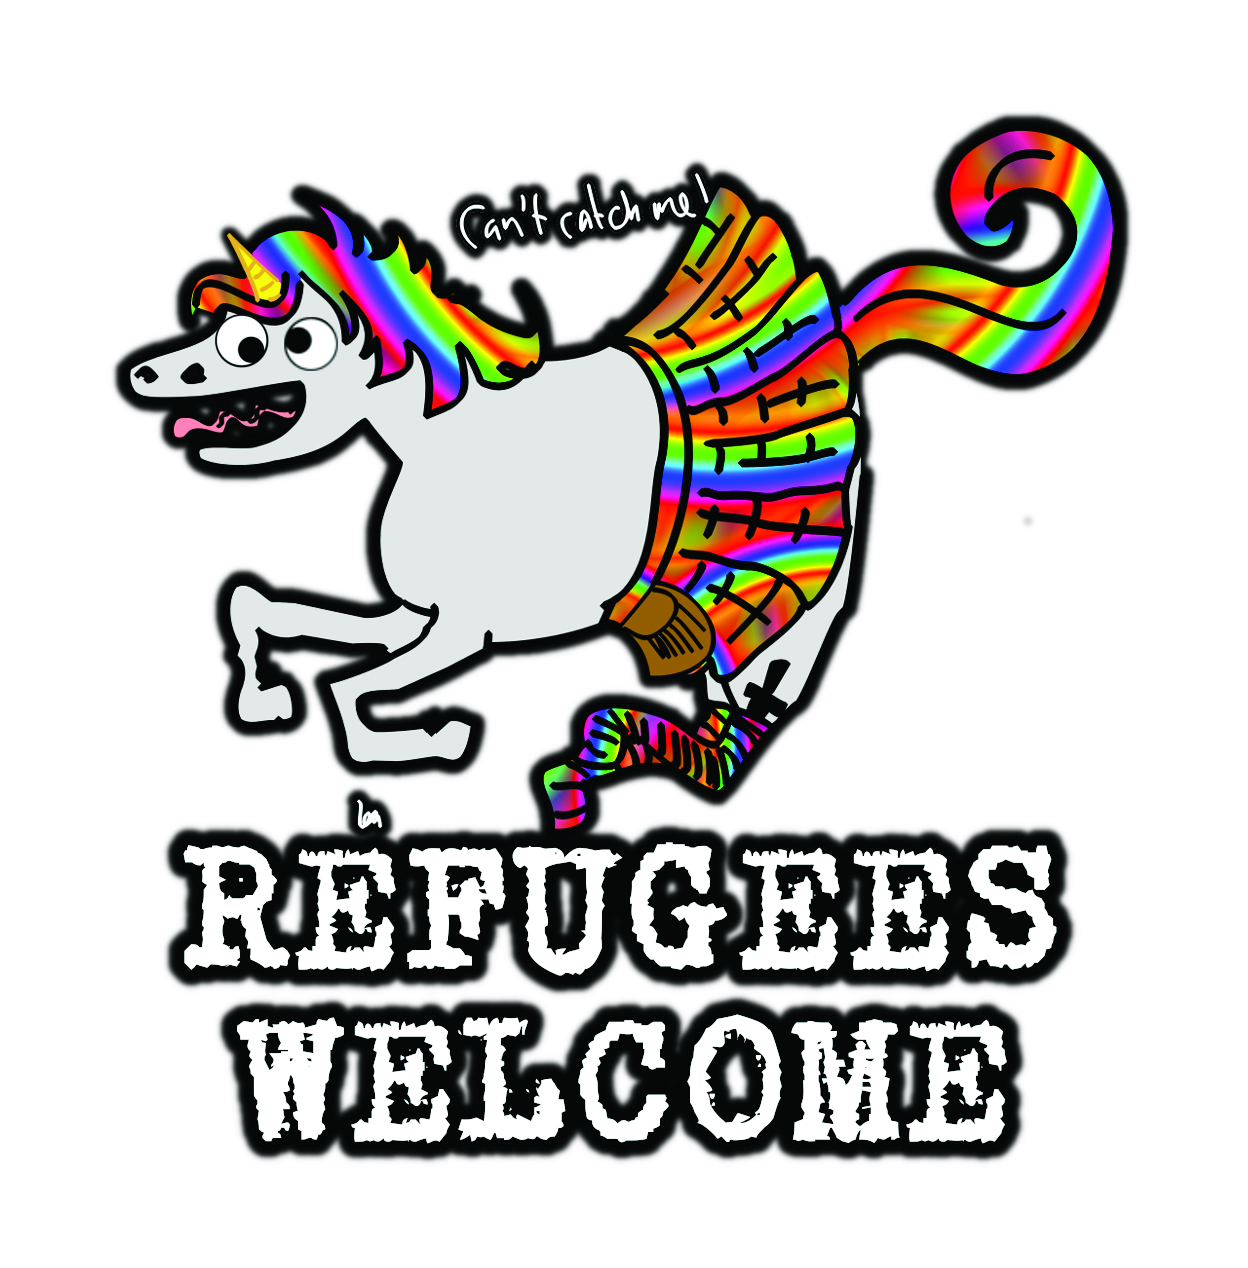 gary-refugeeswelcome_2_.png